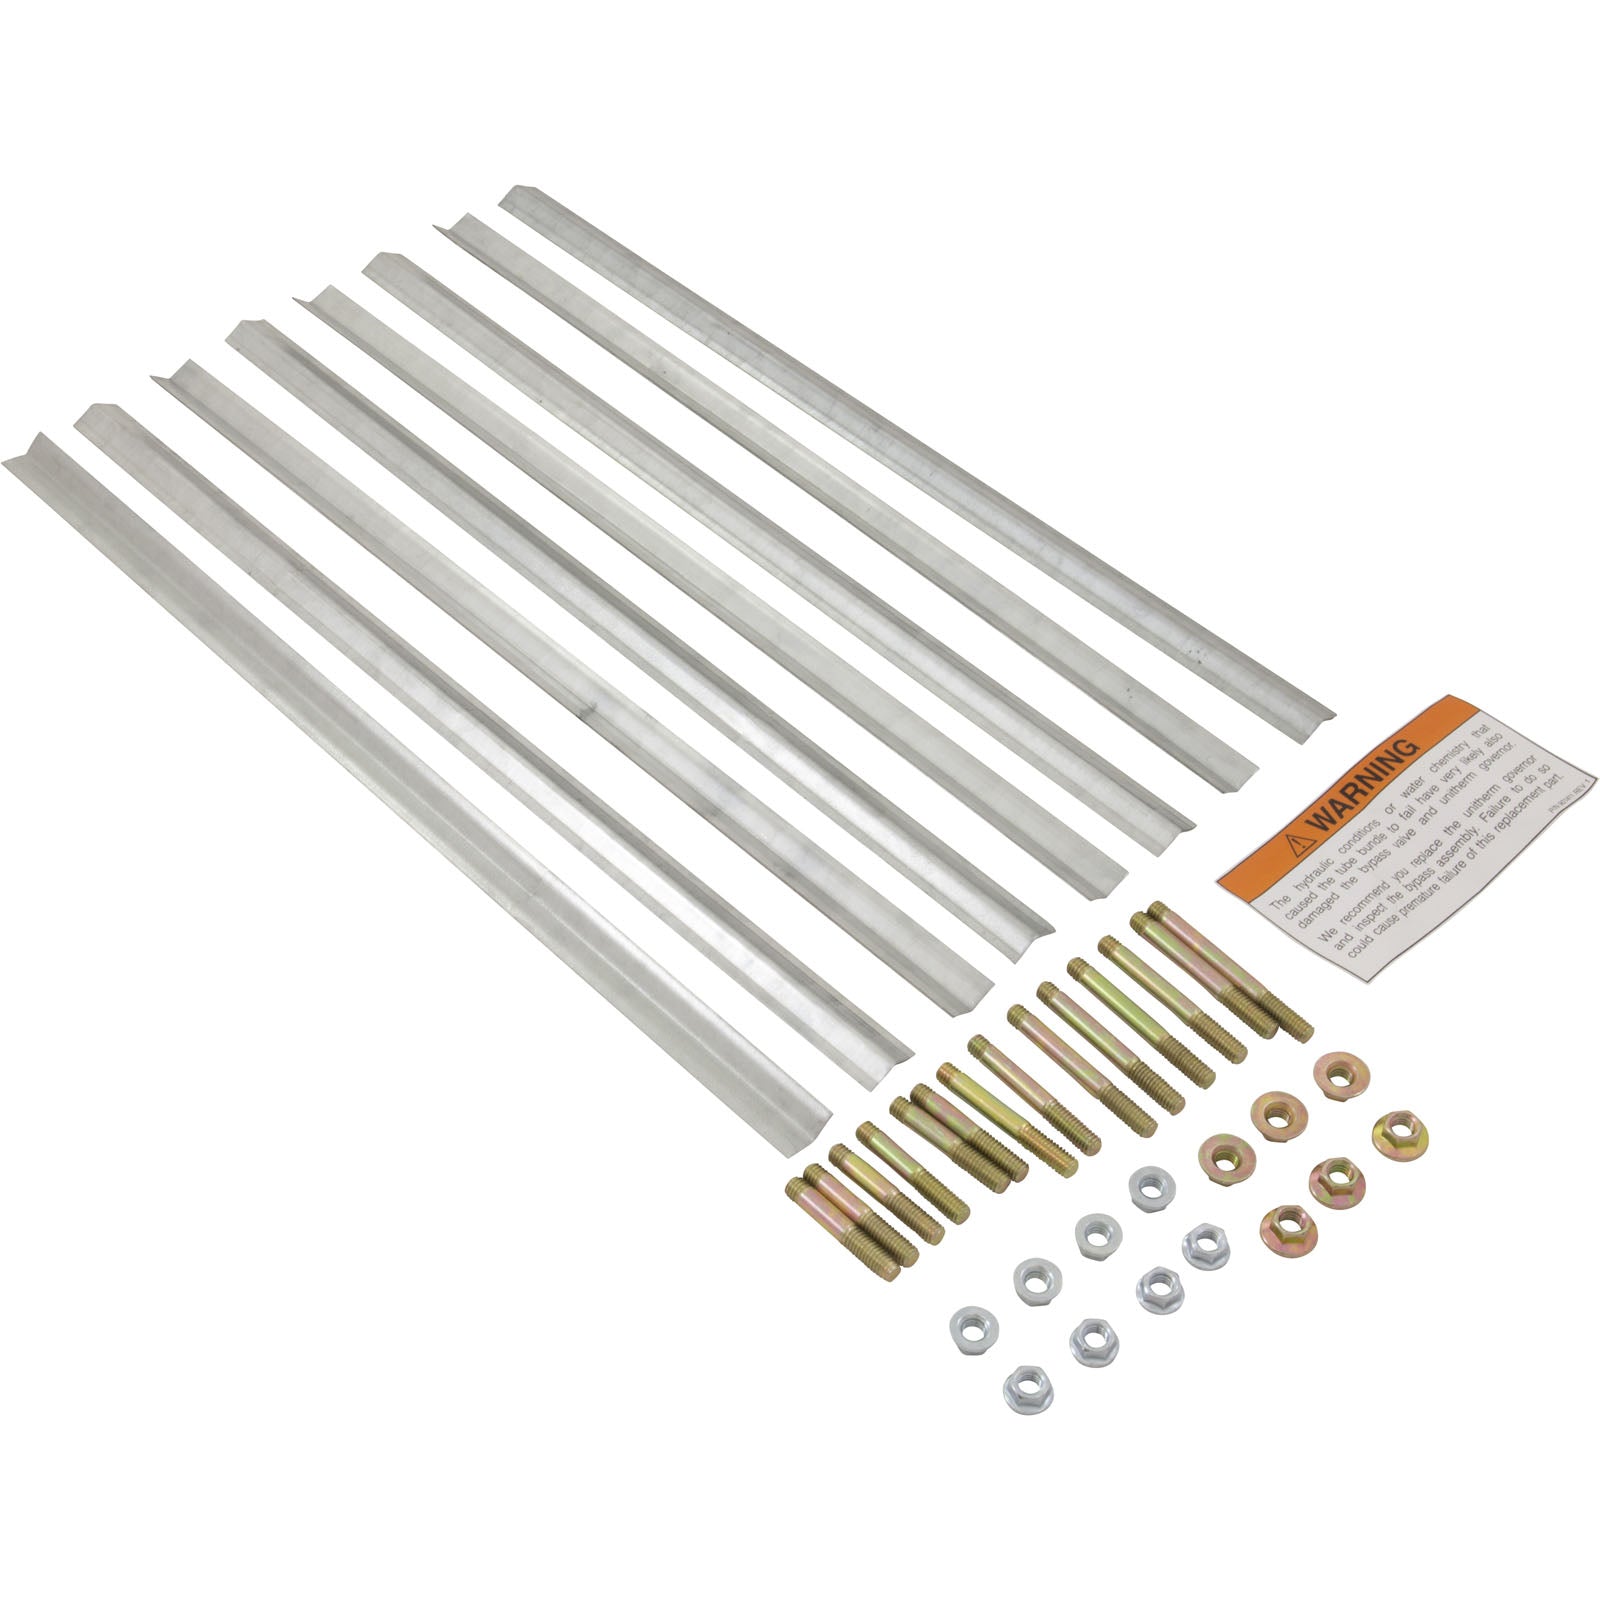 Raypak 010058F ASME Copper Tube Bundle For Model 406A and 407A Pool Heater